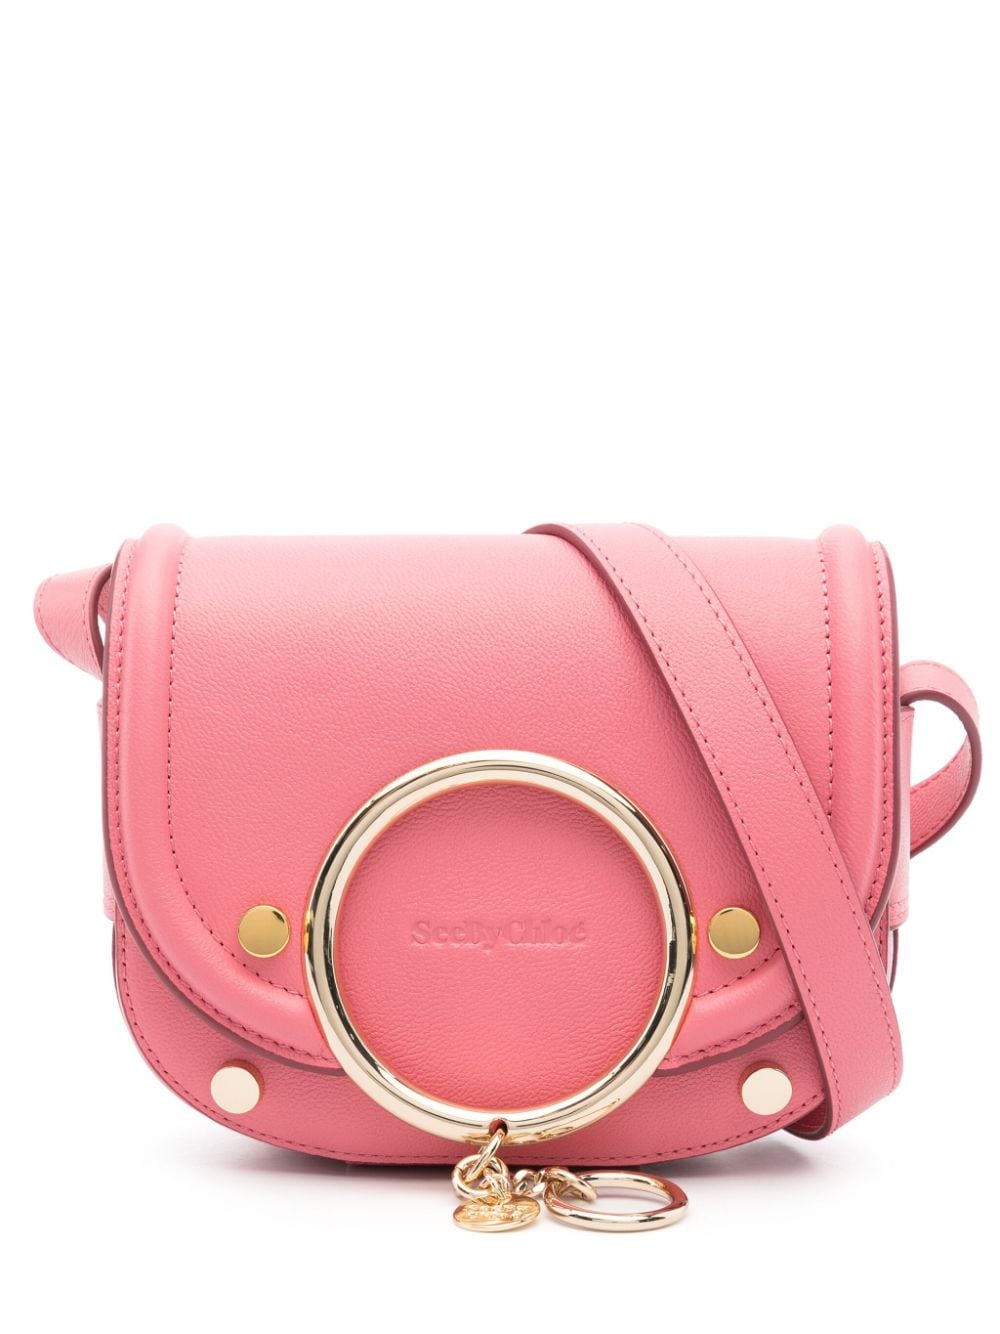 See By Chloé Mara Leather Mini Bag In Pink